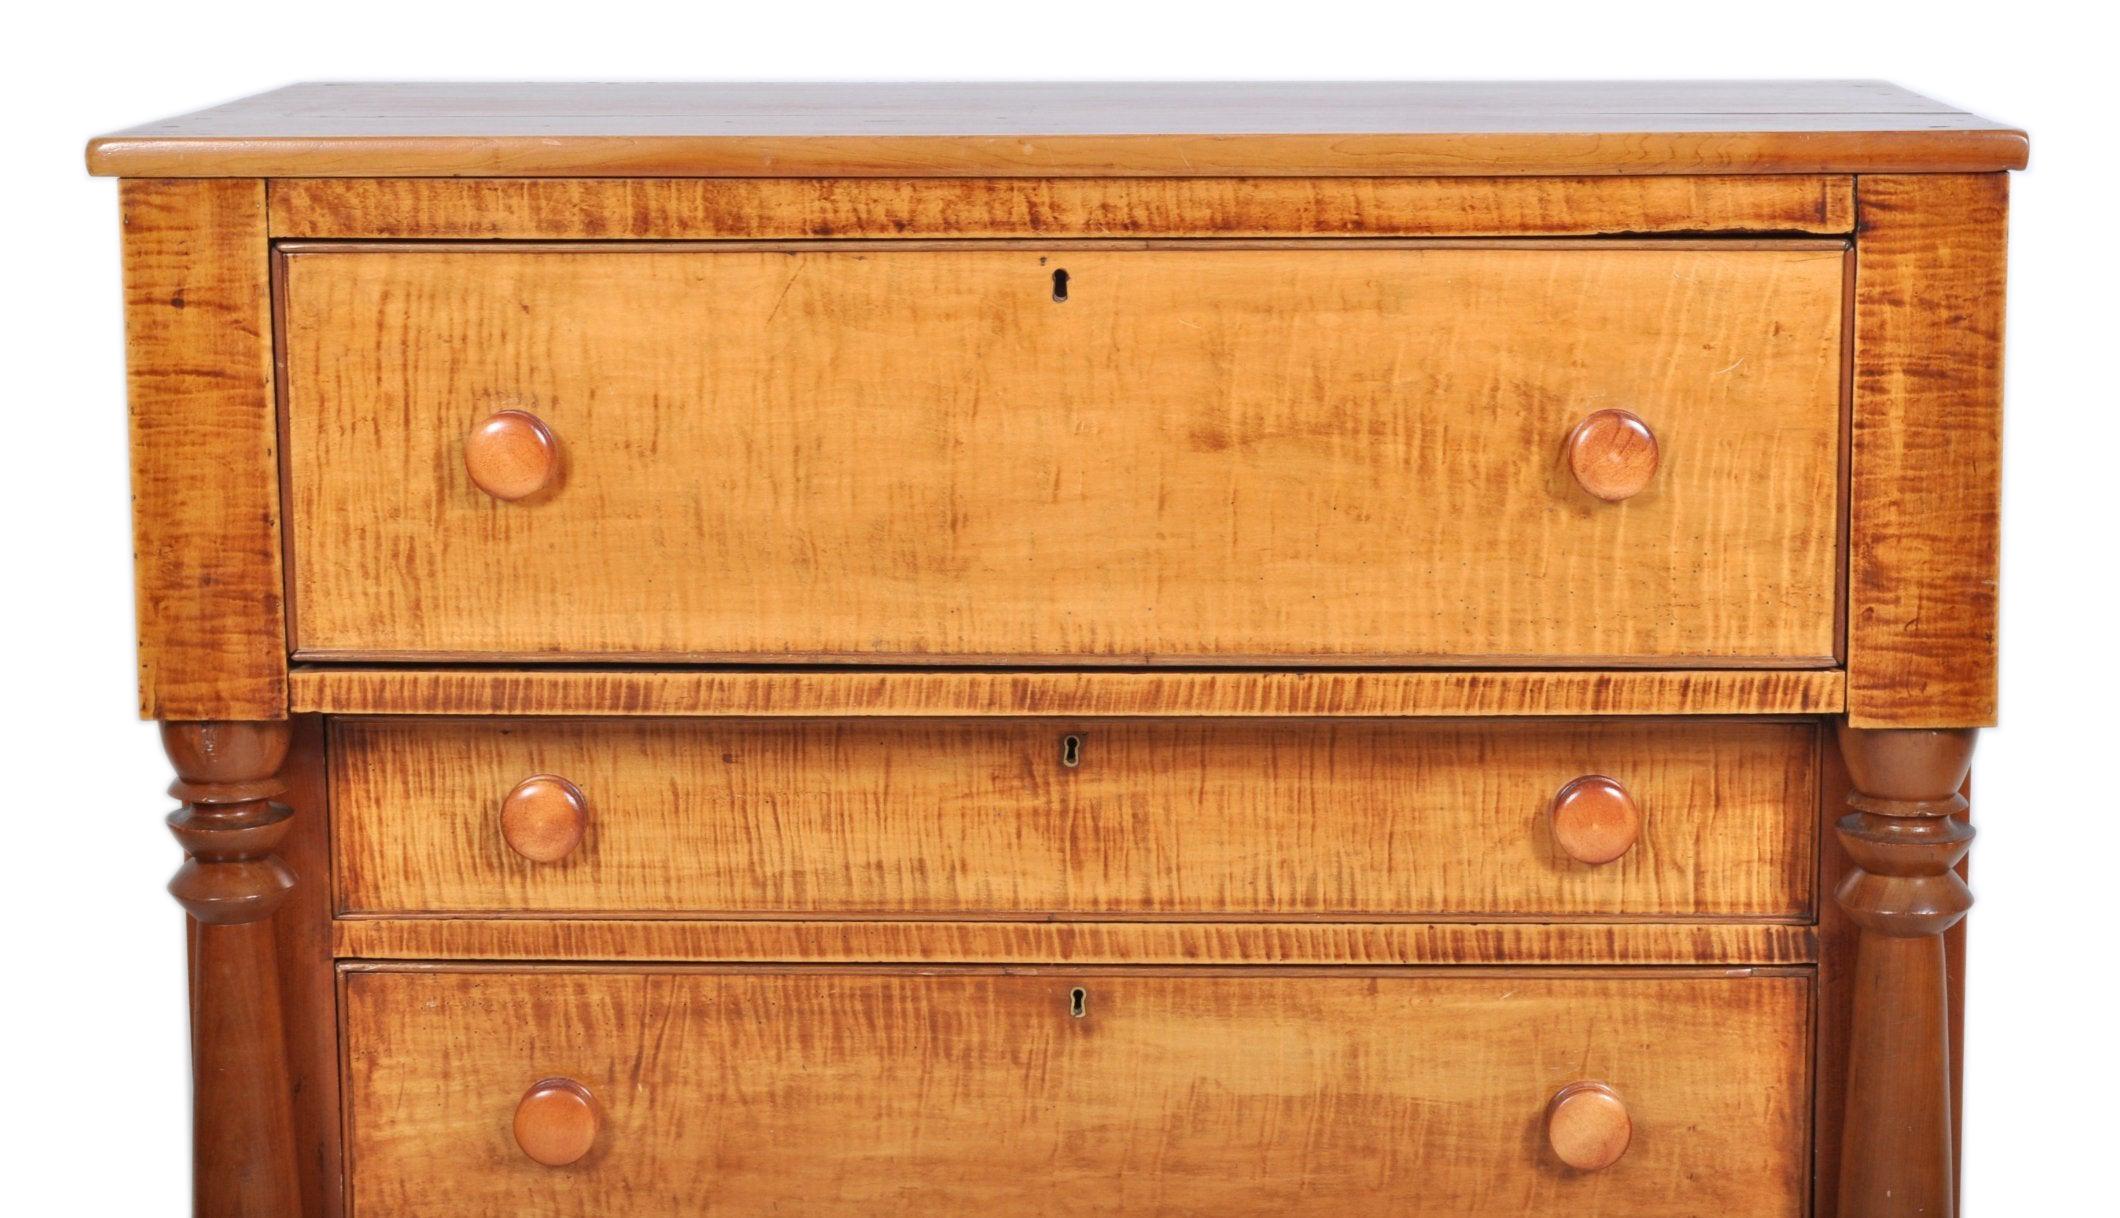 American Empire Antique Pennsylvanian 'Tiger Maple' Chest of Drawers, circa 1840